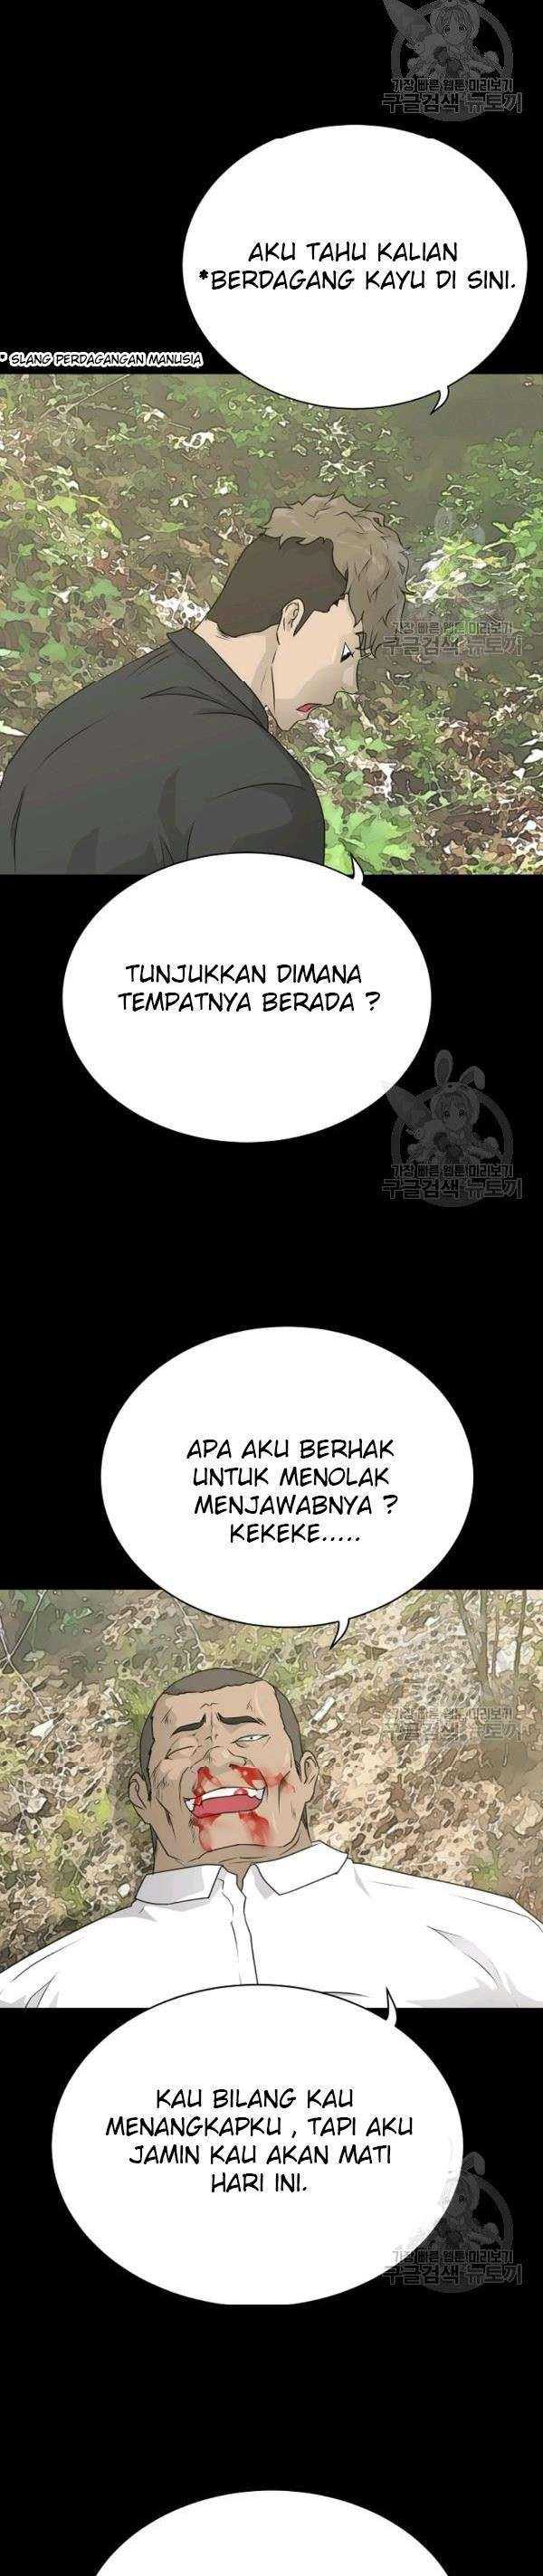 Trigger Chapter 71